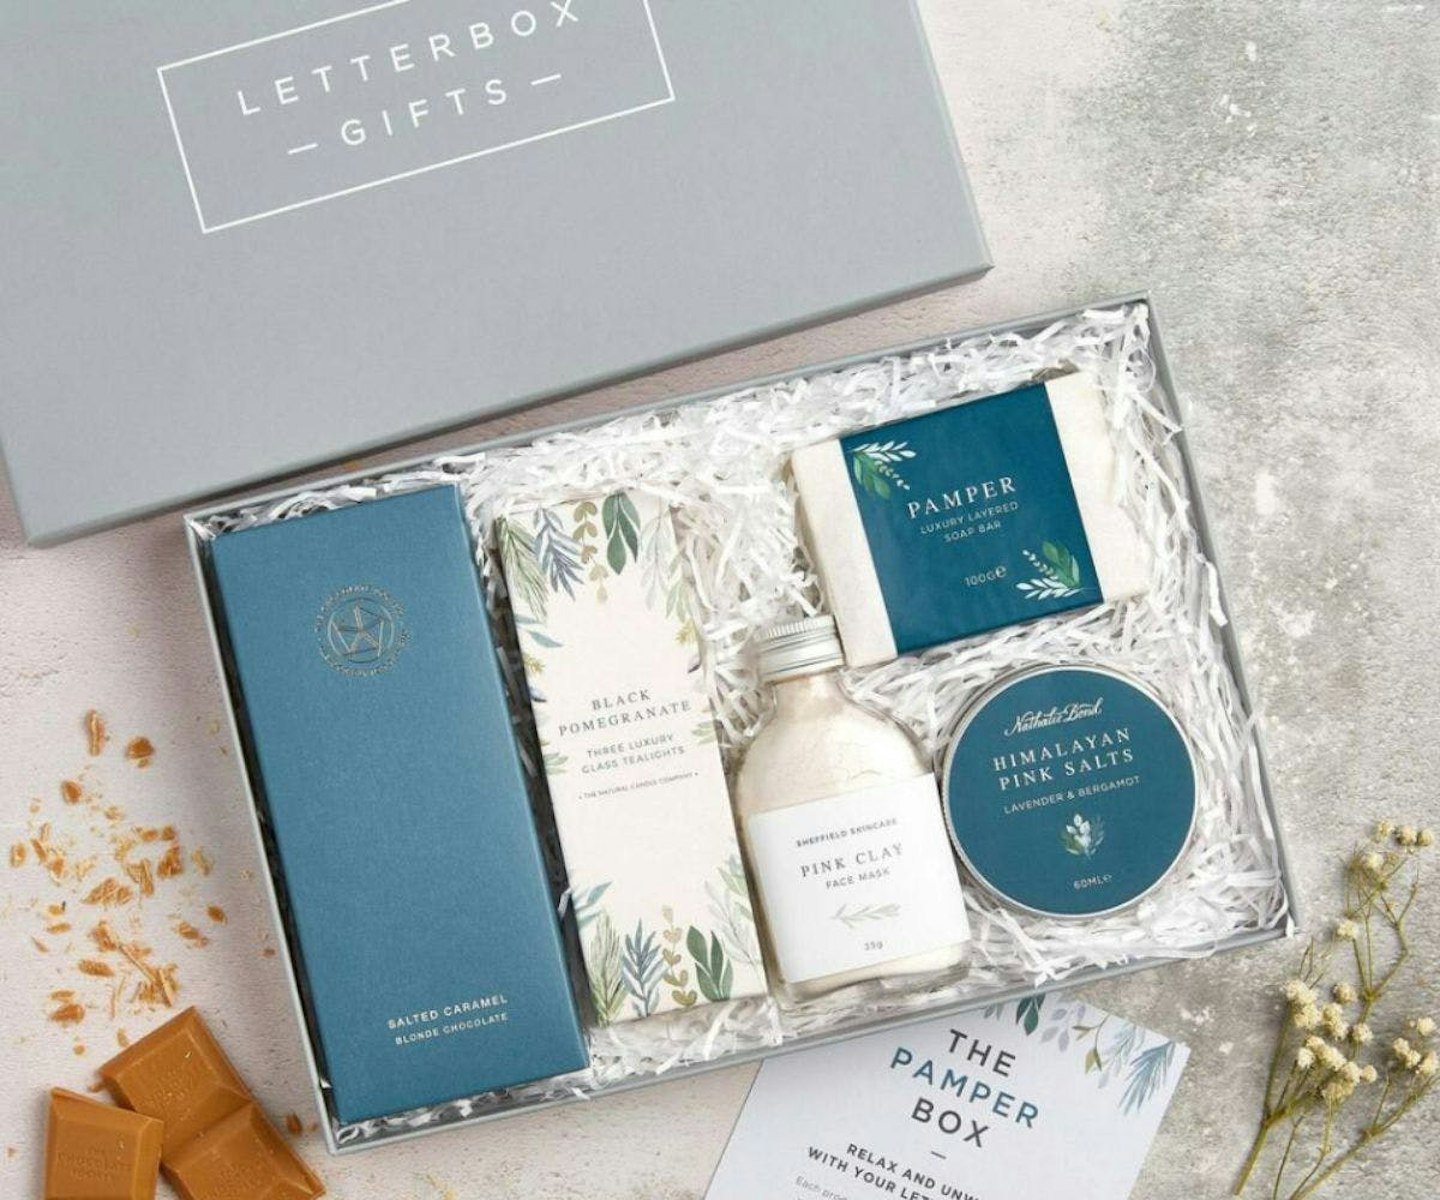 'The Pamper Box' Letterbox Gift Set